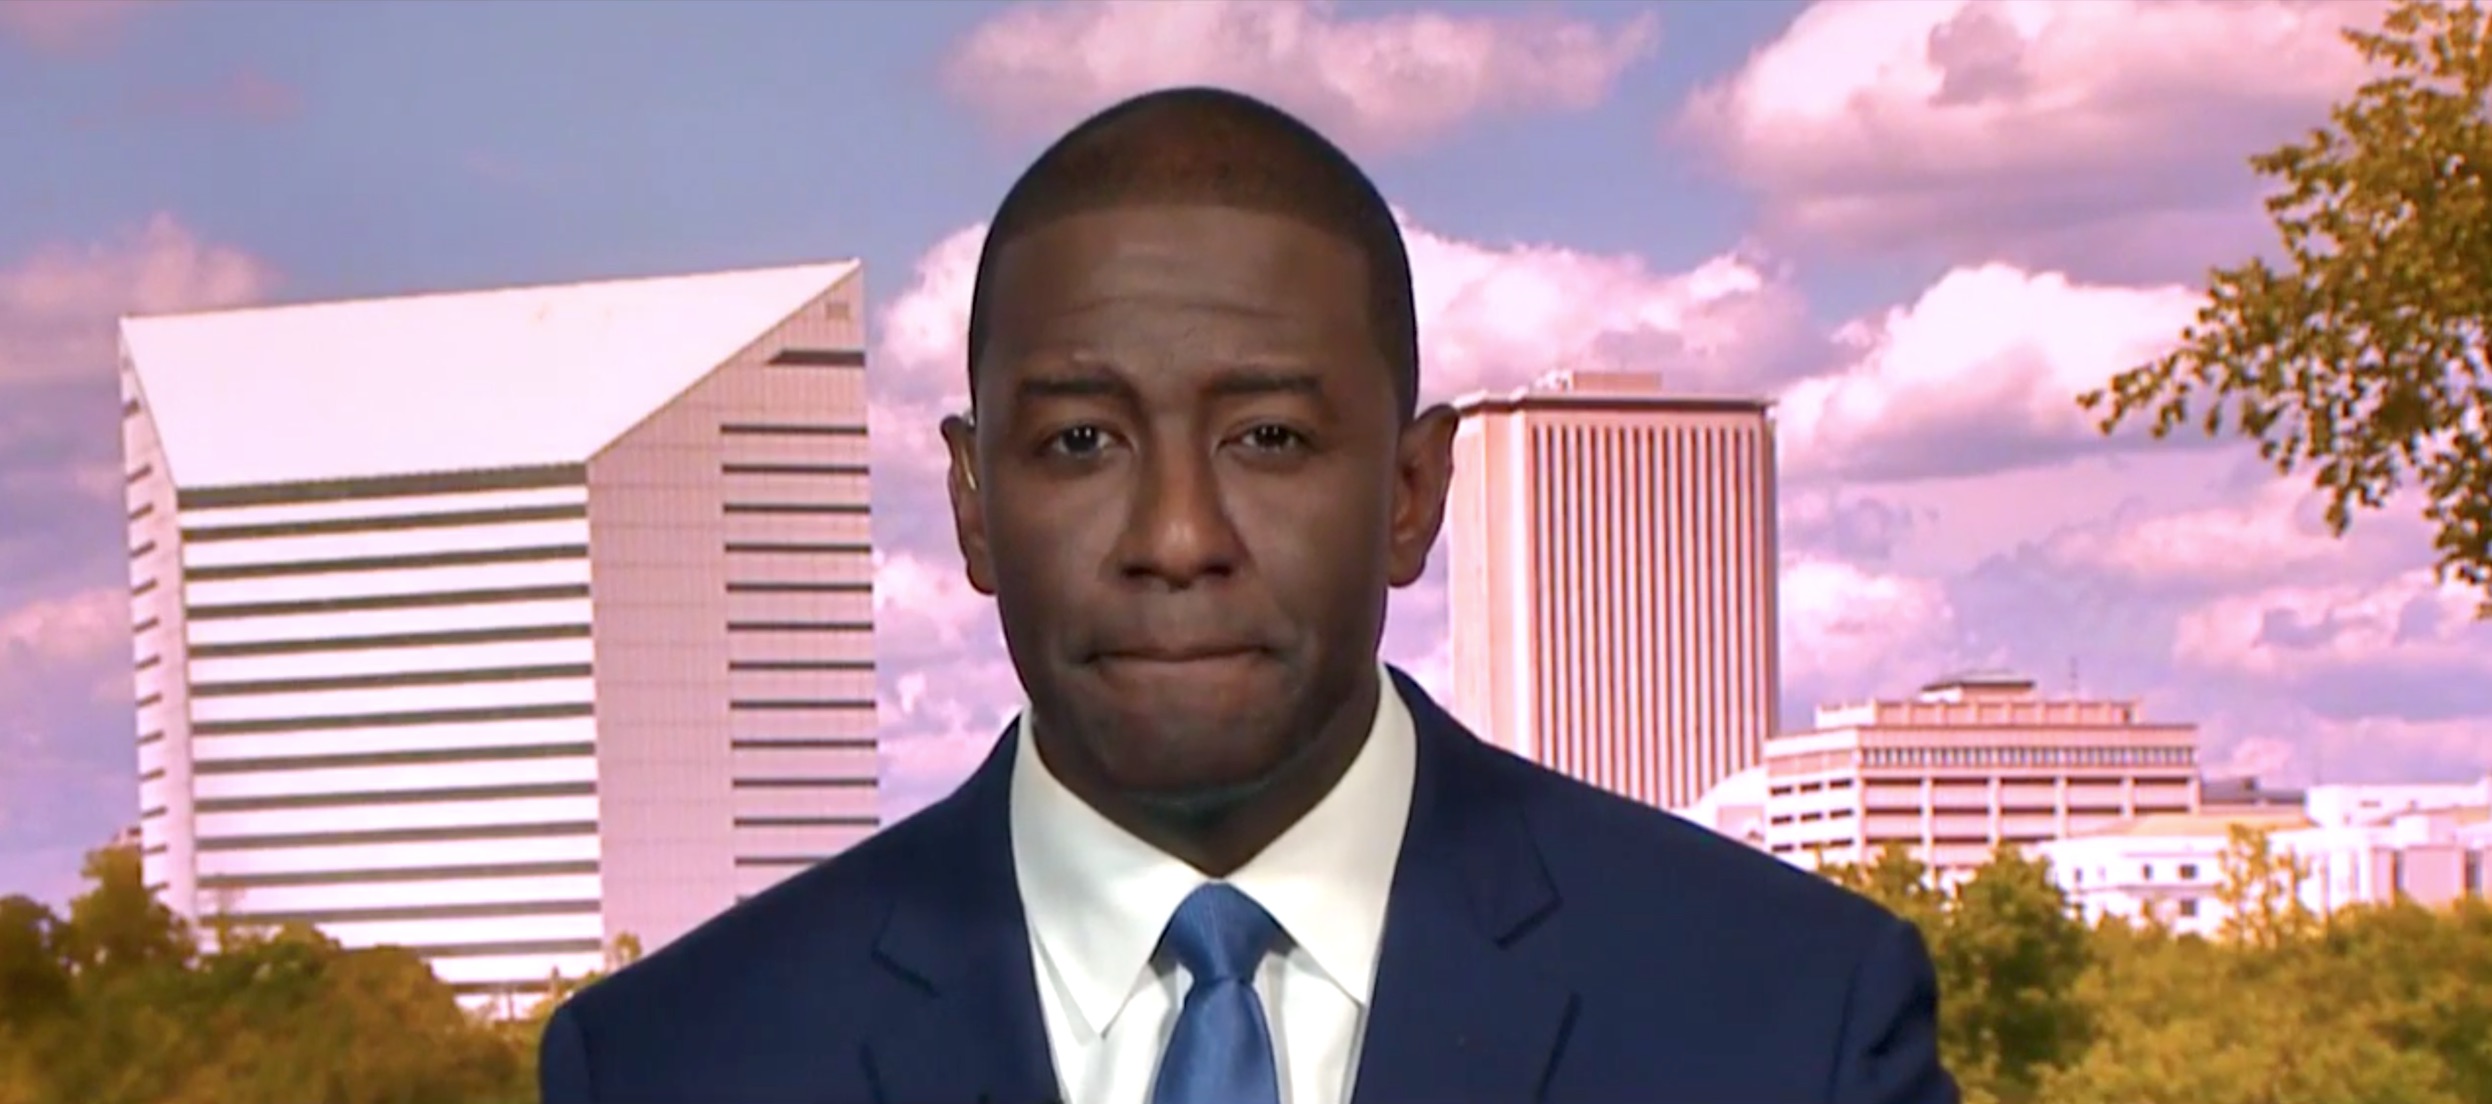 Democrat Andrew Gillum Hit with Multiple Federal Subpoenas Surrounding his Campaign for Governor